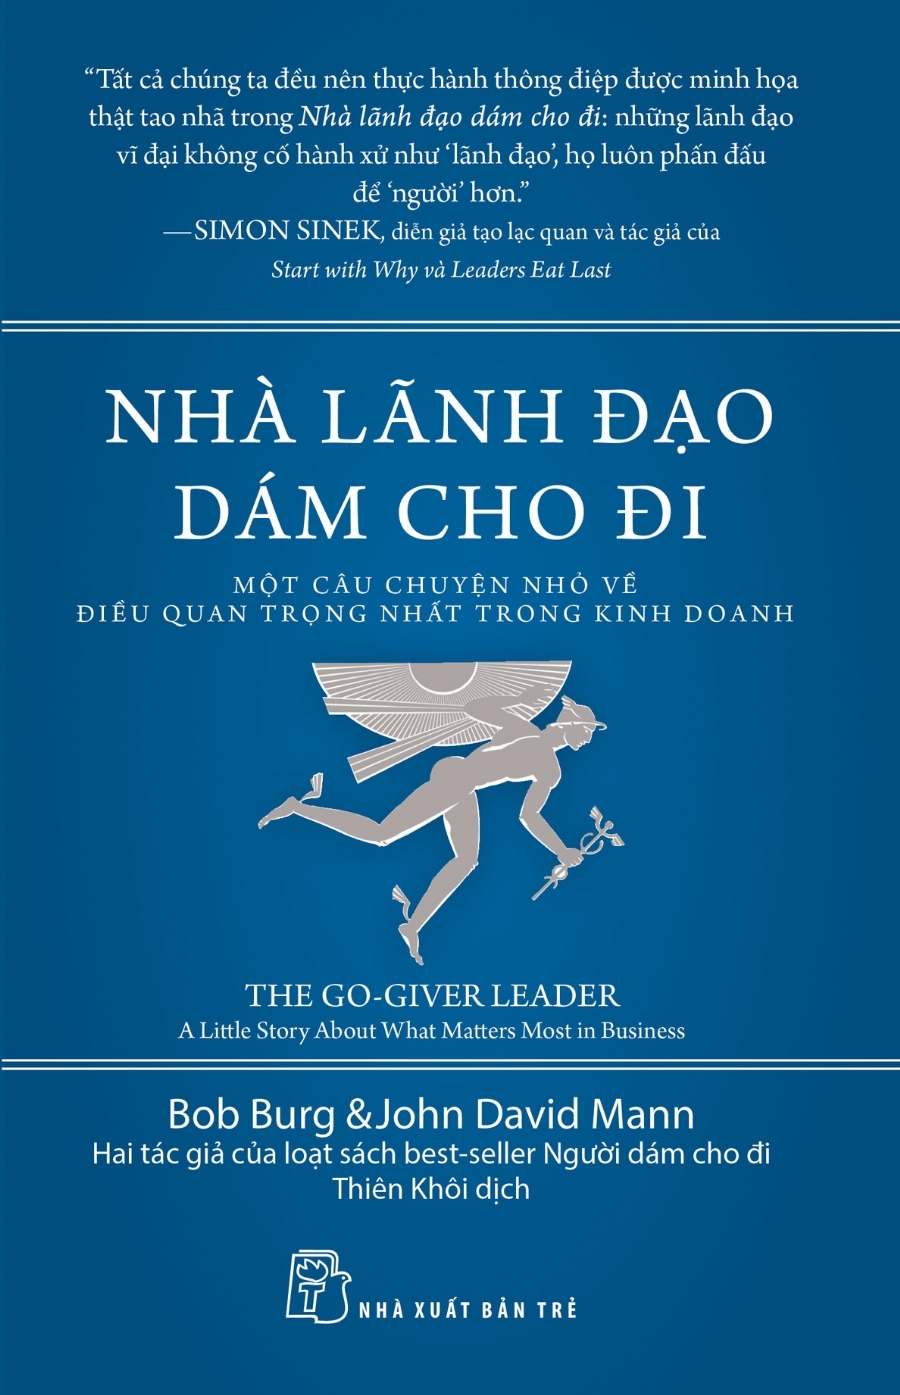 The Go-Giver Leader: Vietnamese